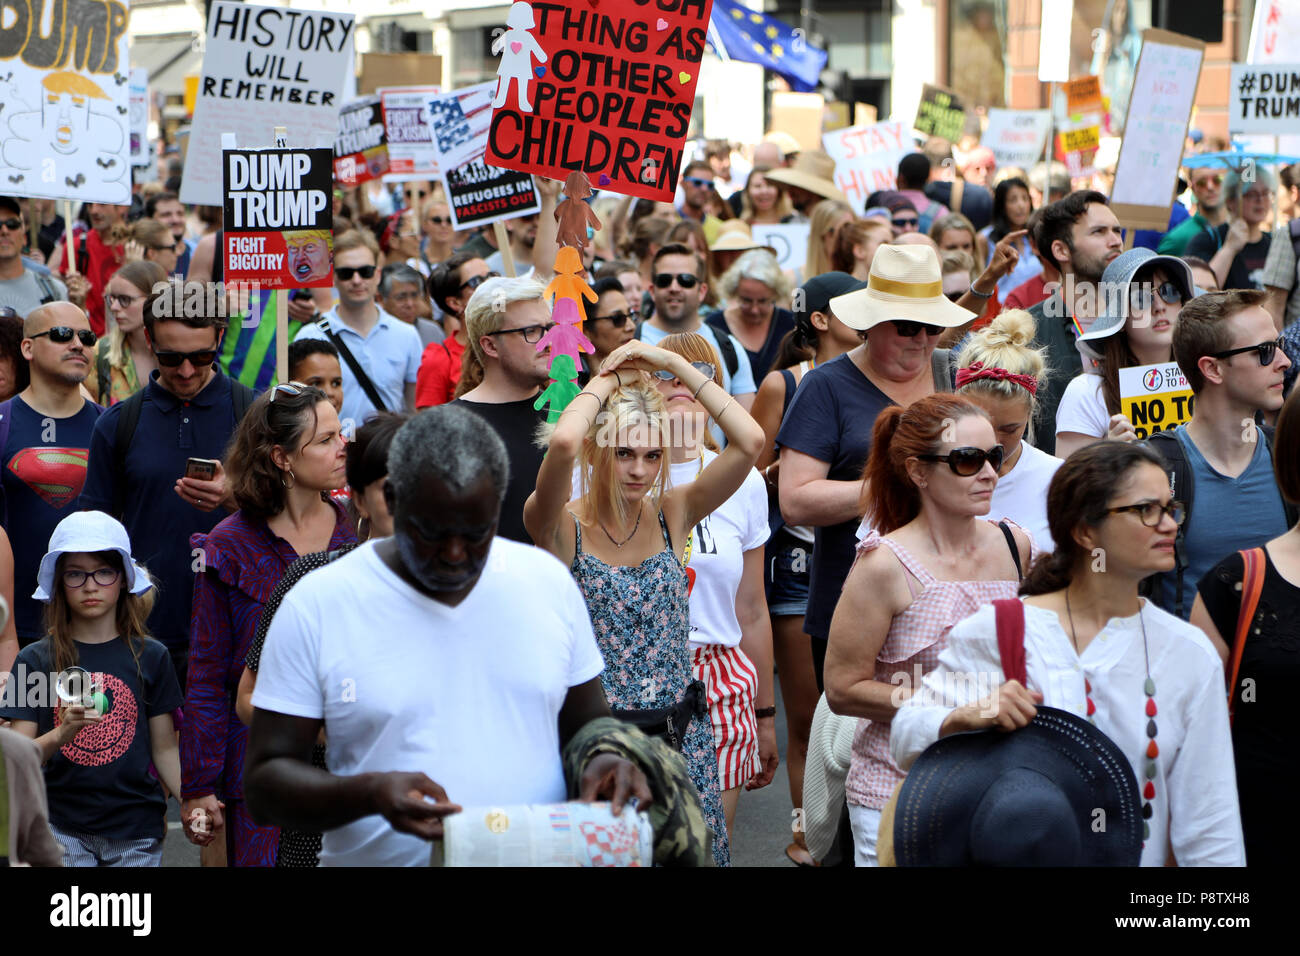 London, UK – July 13, 2018: A young woman adjusts her hair while taking part in a demonstration to protest against US president Donald Trump, during his visit to the country Credit: Dominic Dudley/Alamy Live News Stock Photo